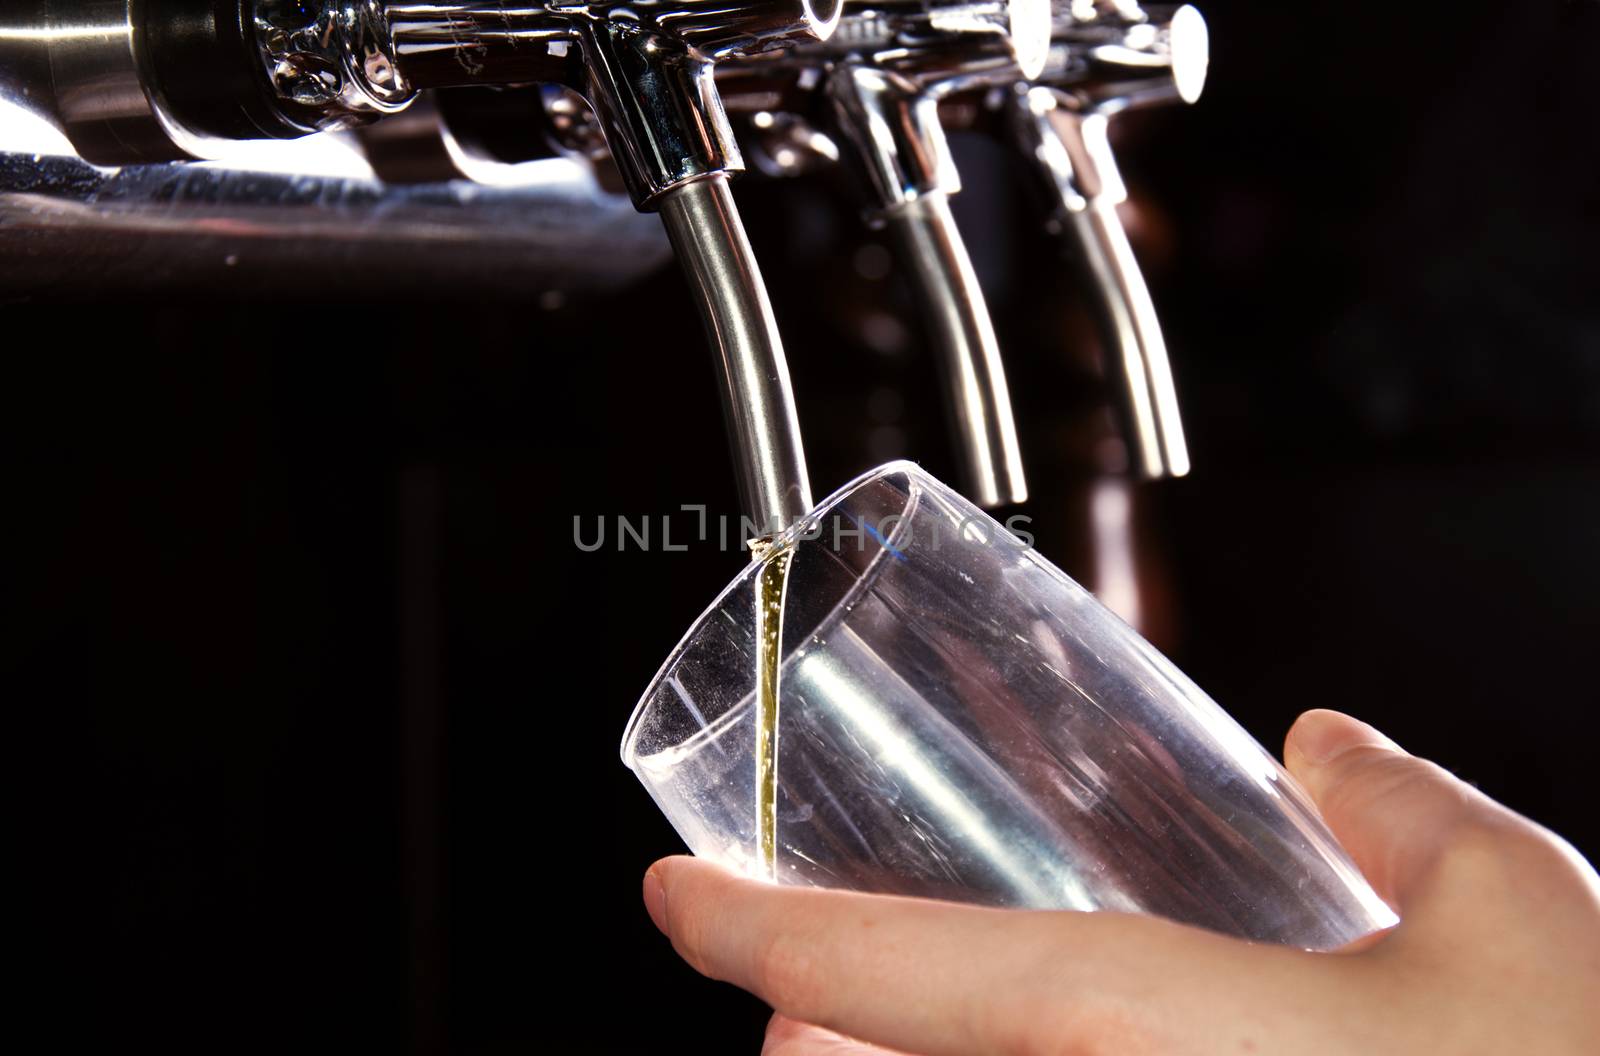 Alcohol conceptual image. Bartender giving the beer from dispenser.